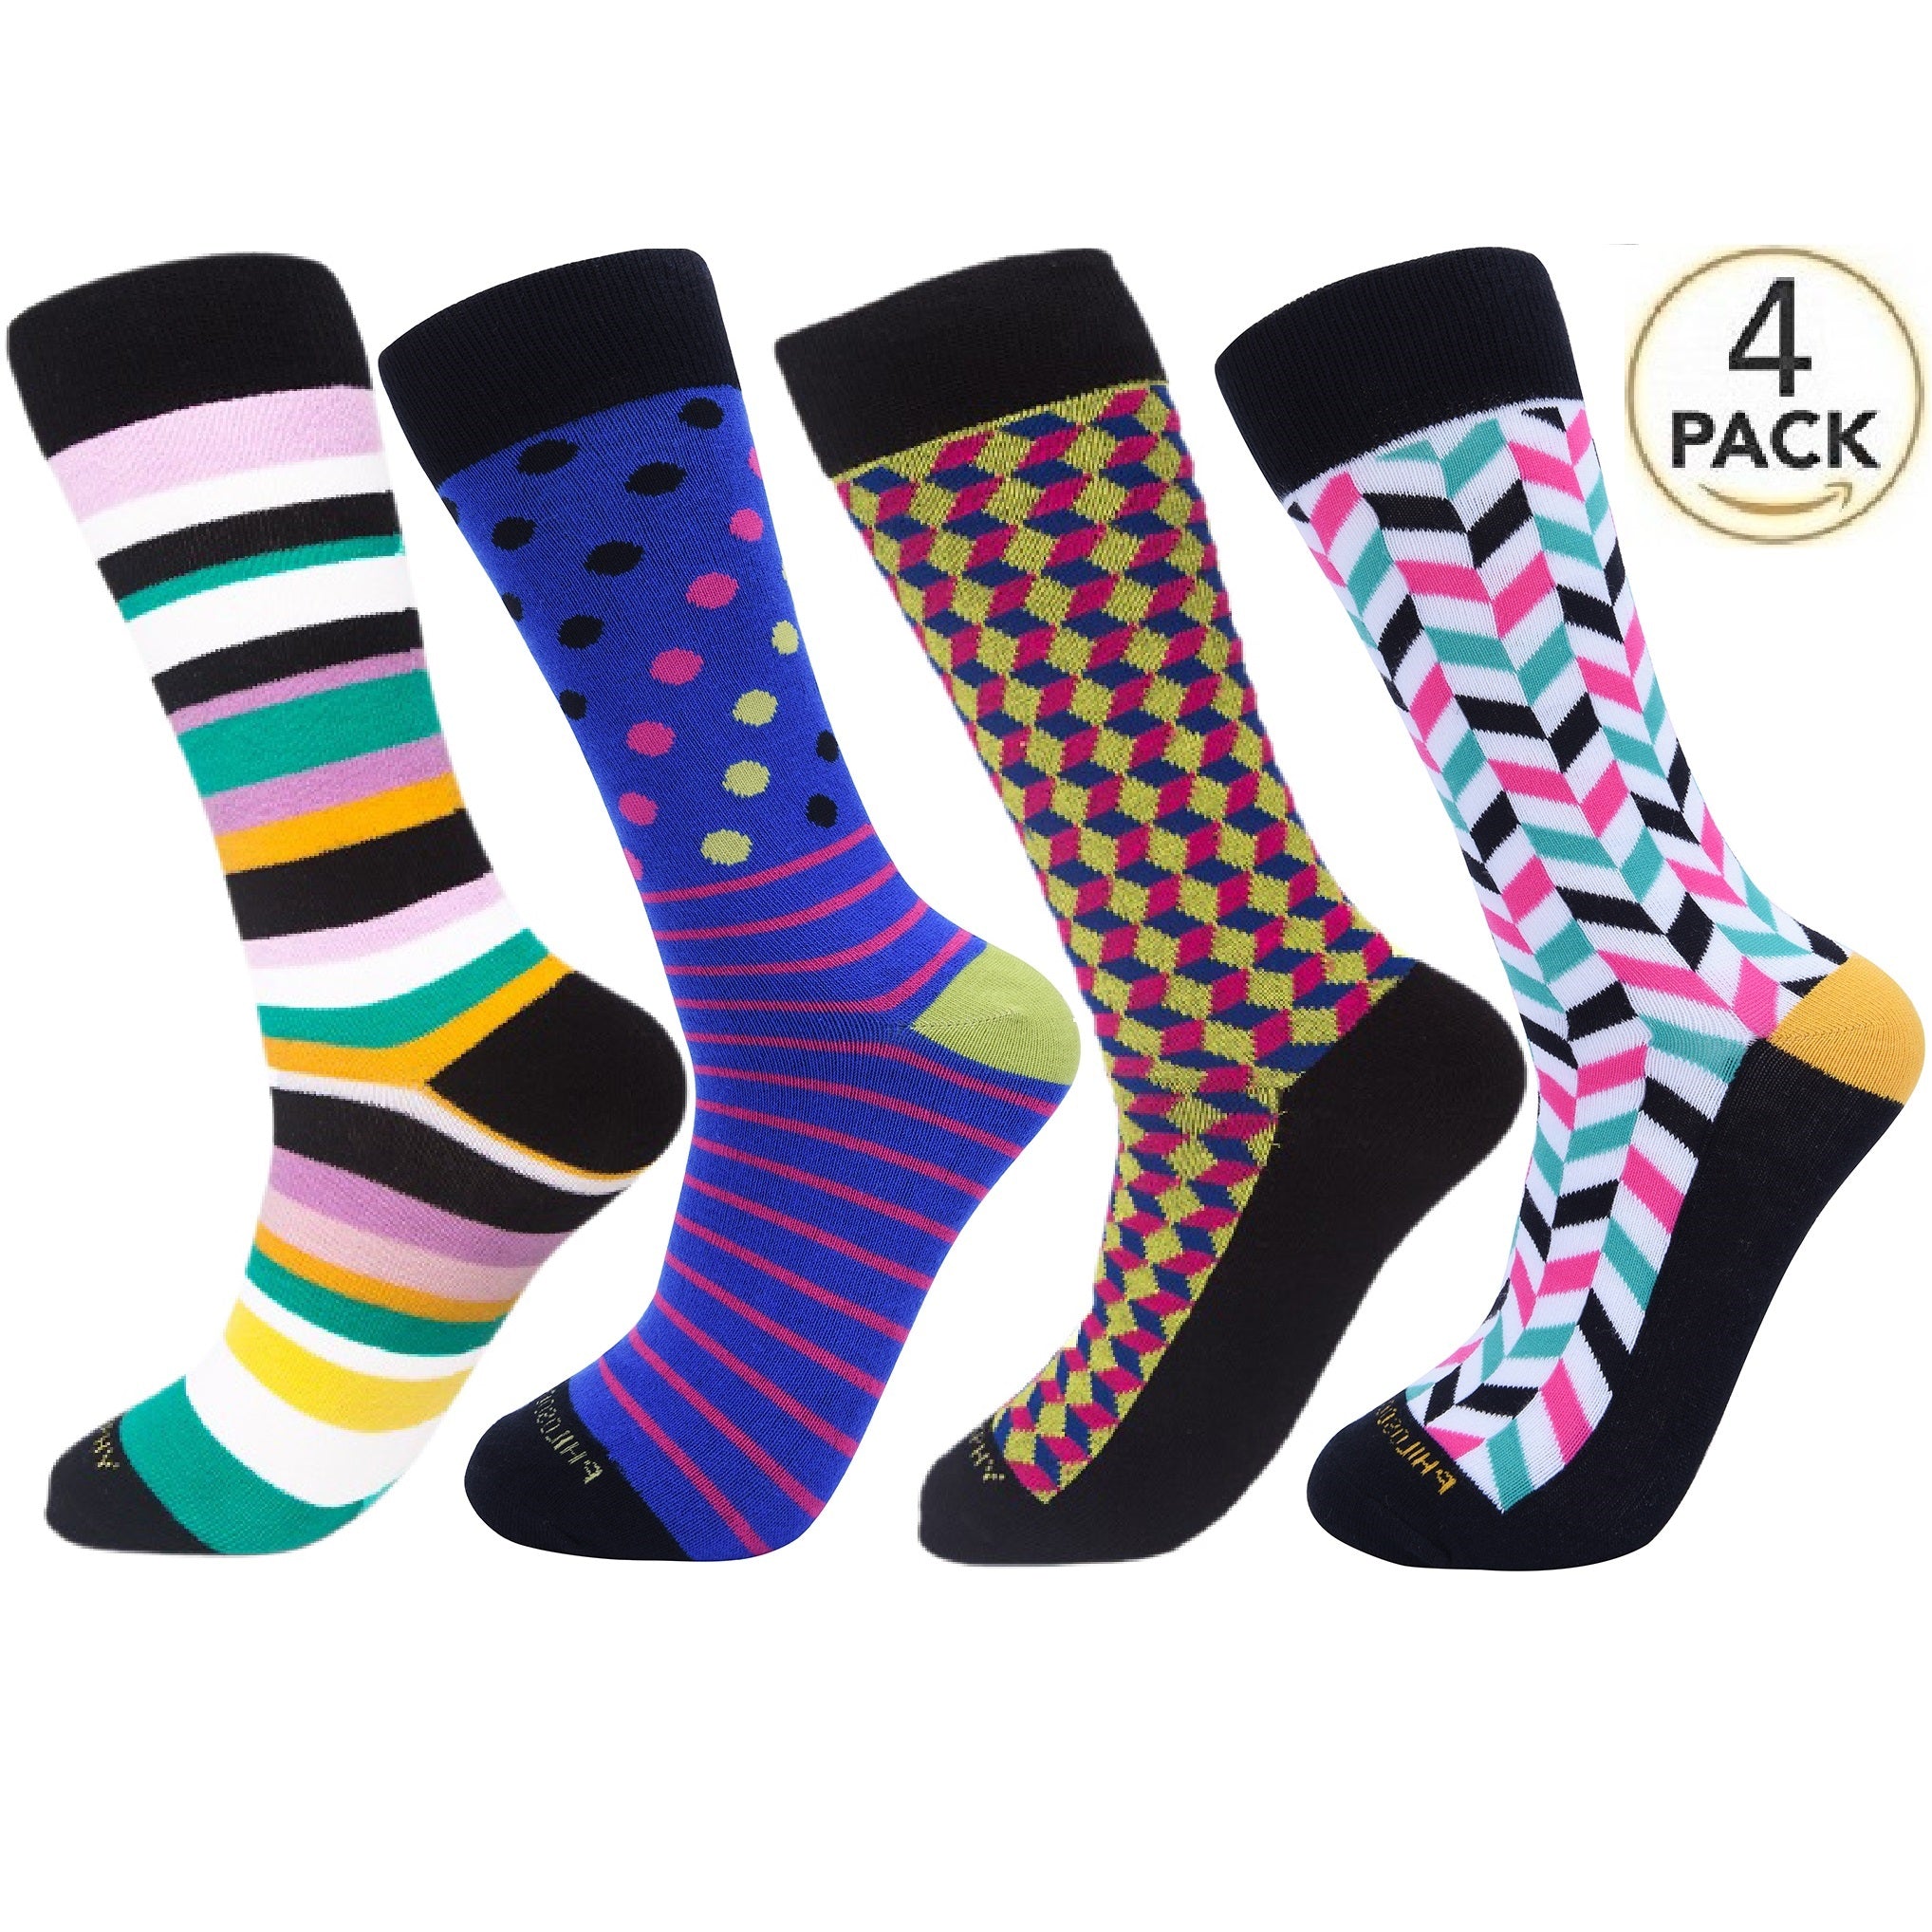 10 Amazing Sock Subscription Boxes You Need to Check Out